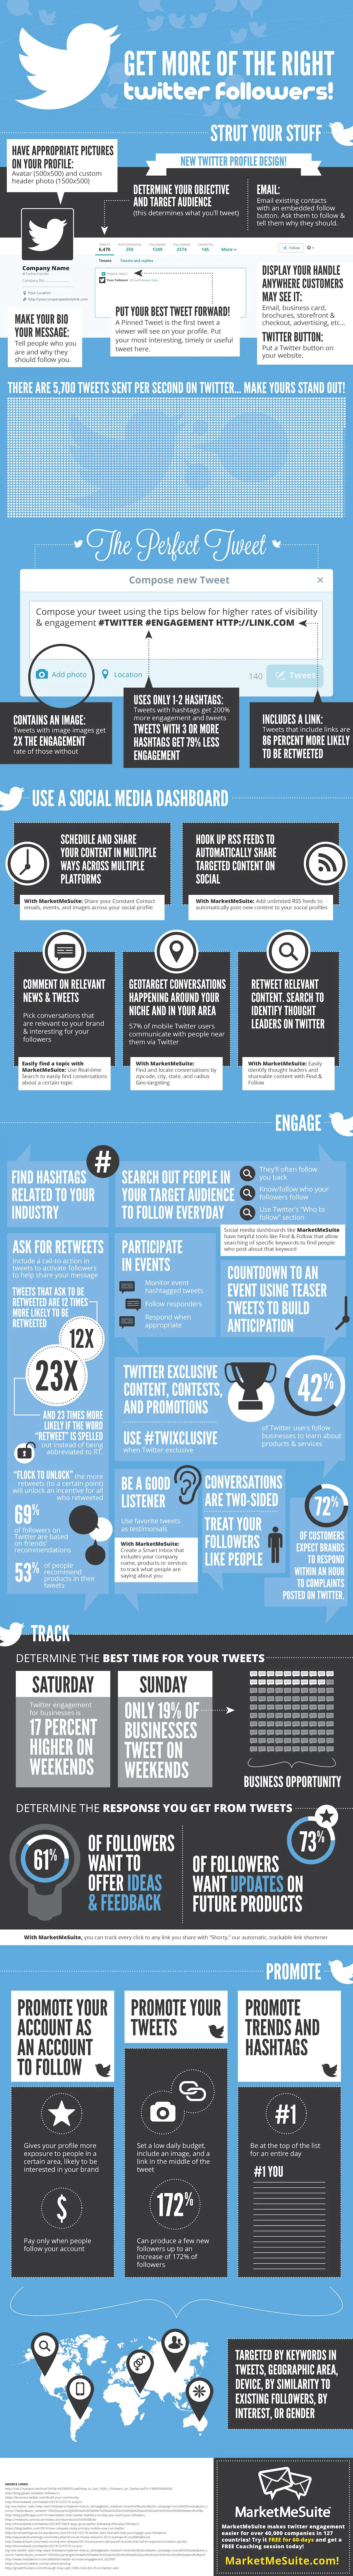 wersm_quality_twitter_followers_infographic